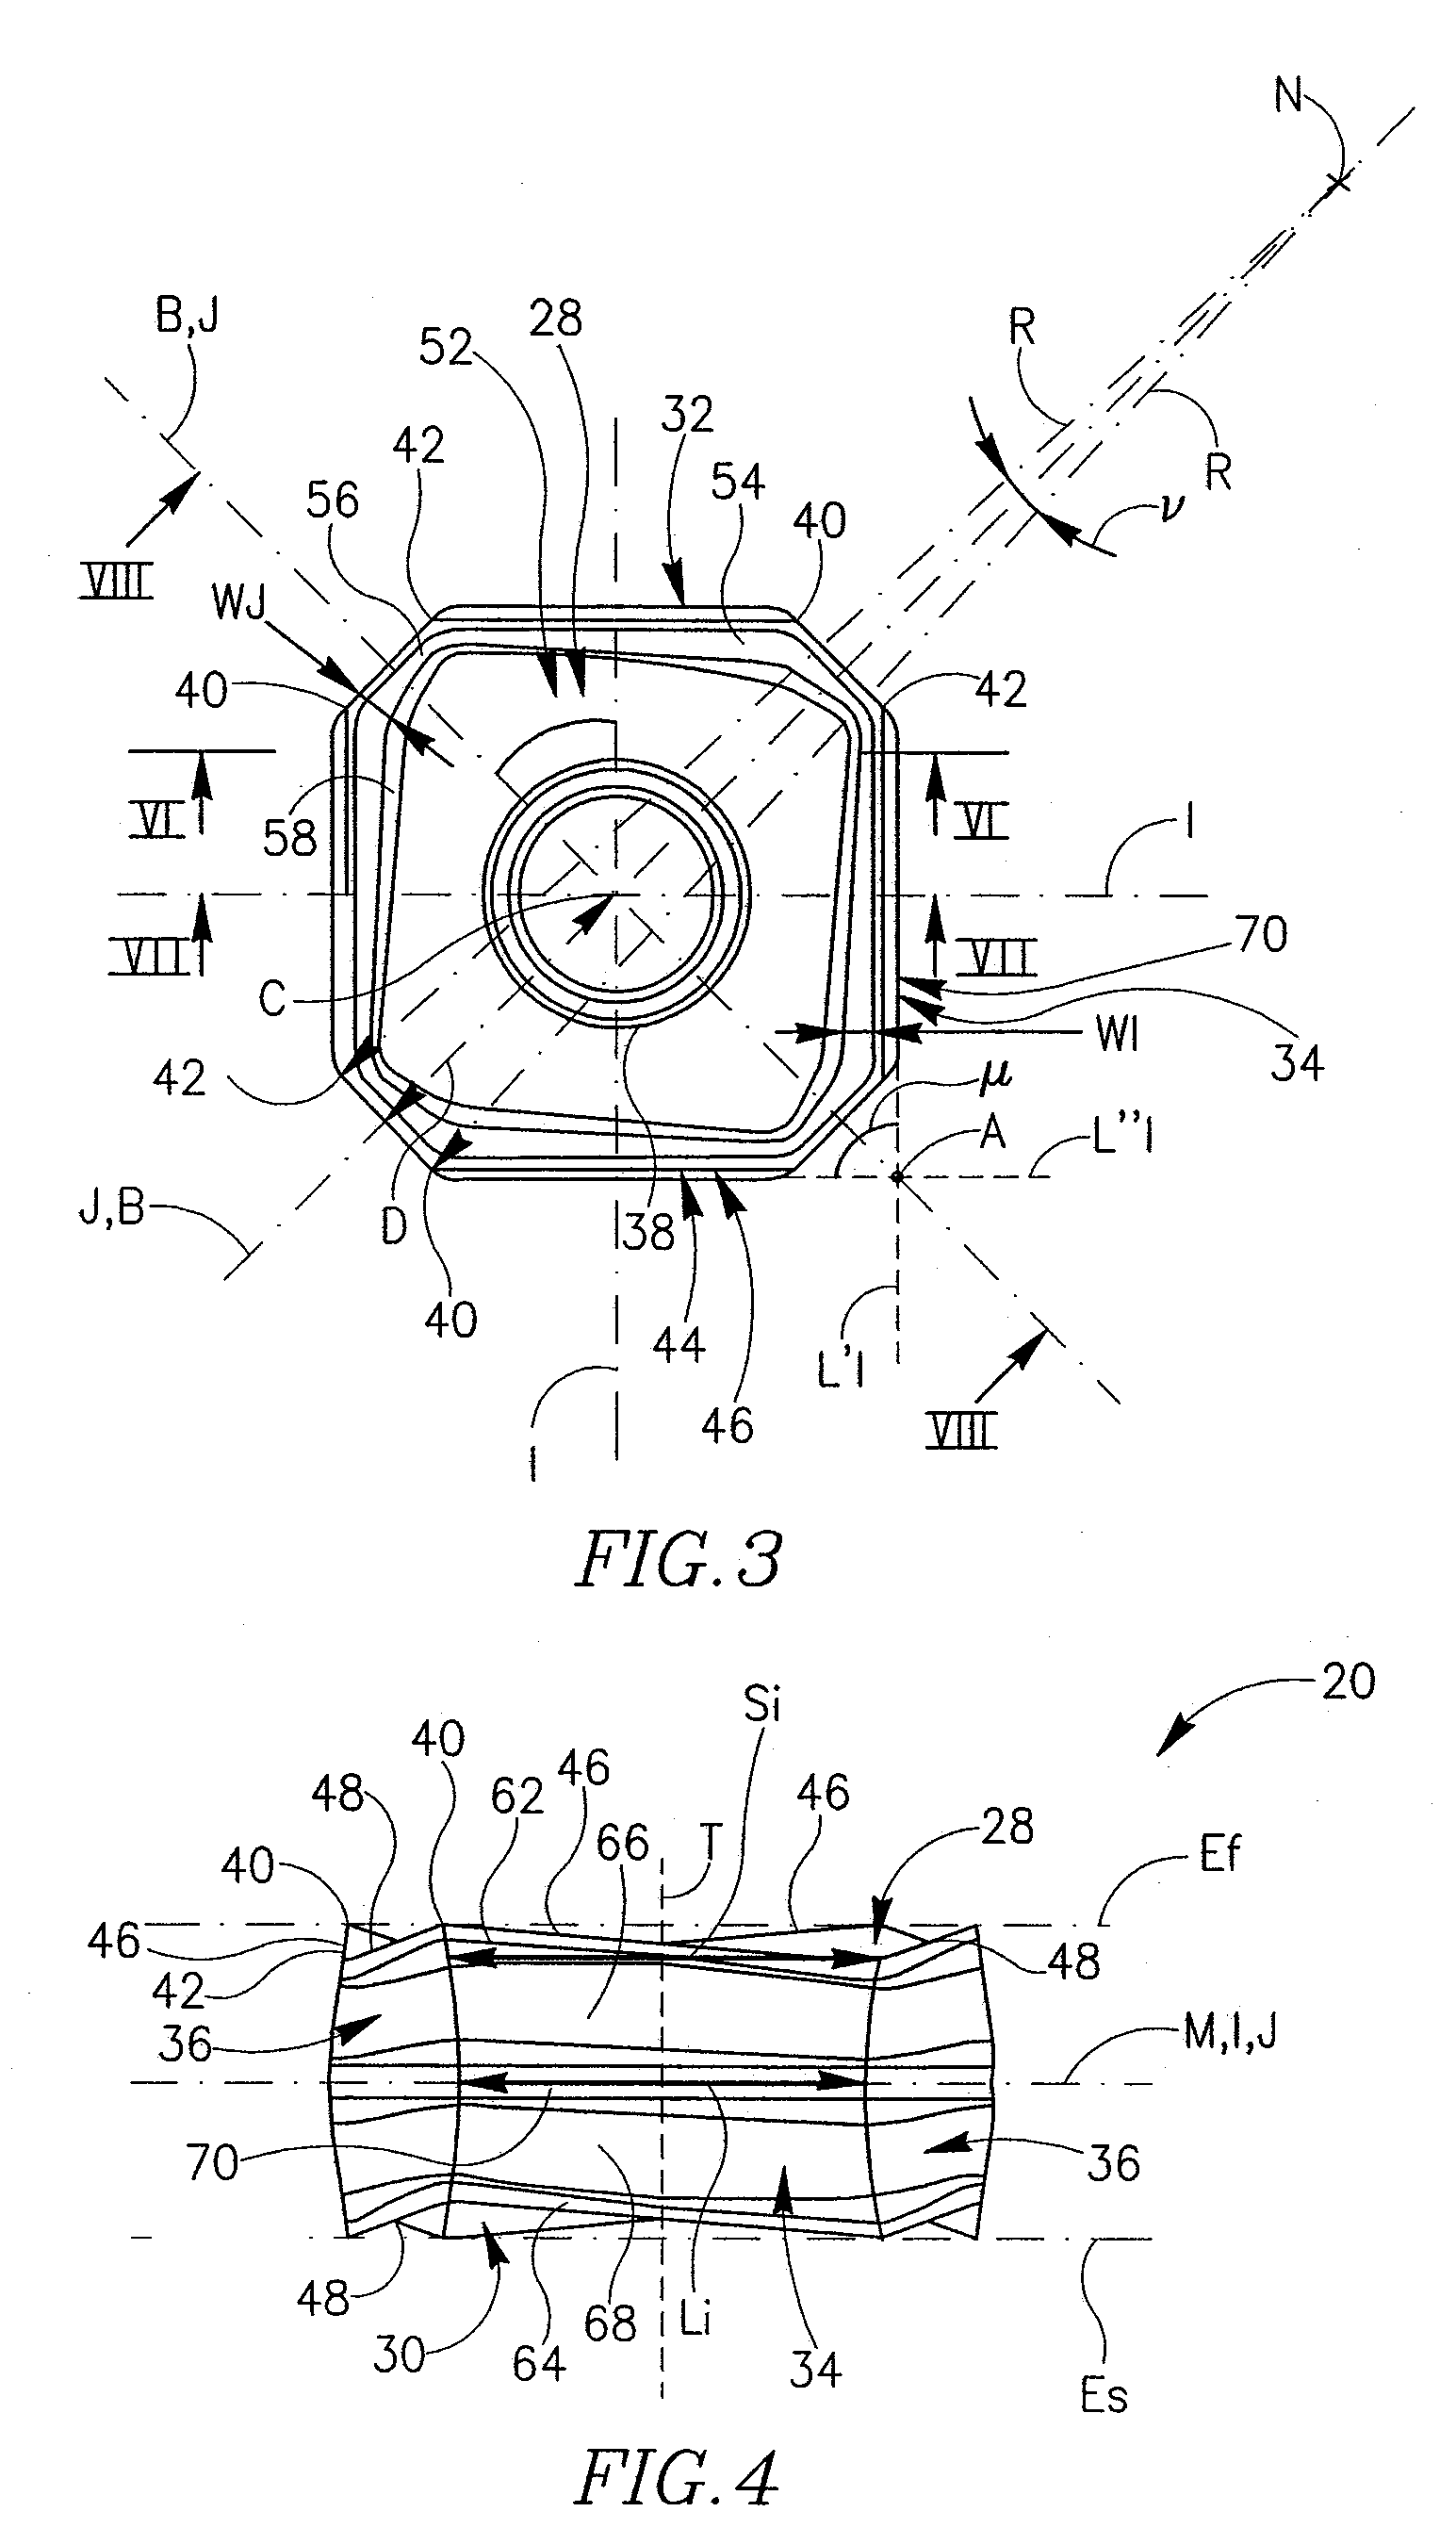 Cutting Insert Having Cylindrically Shaped Side Surface Portions